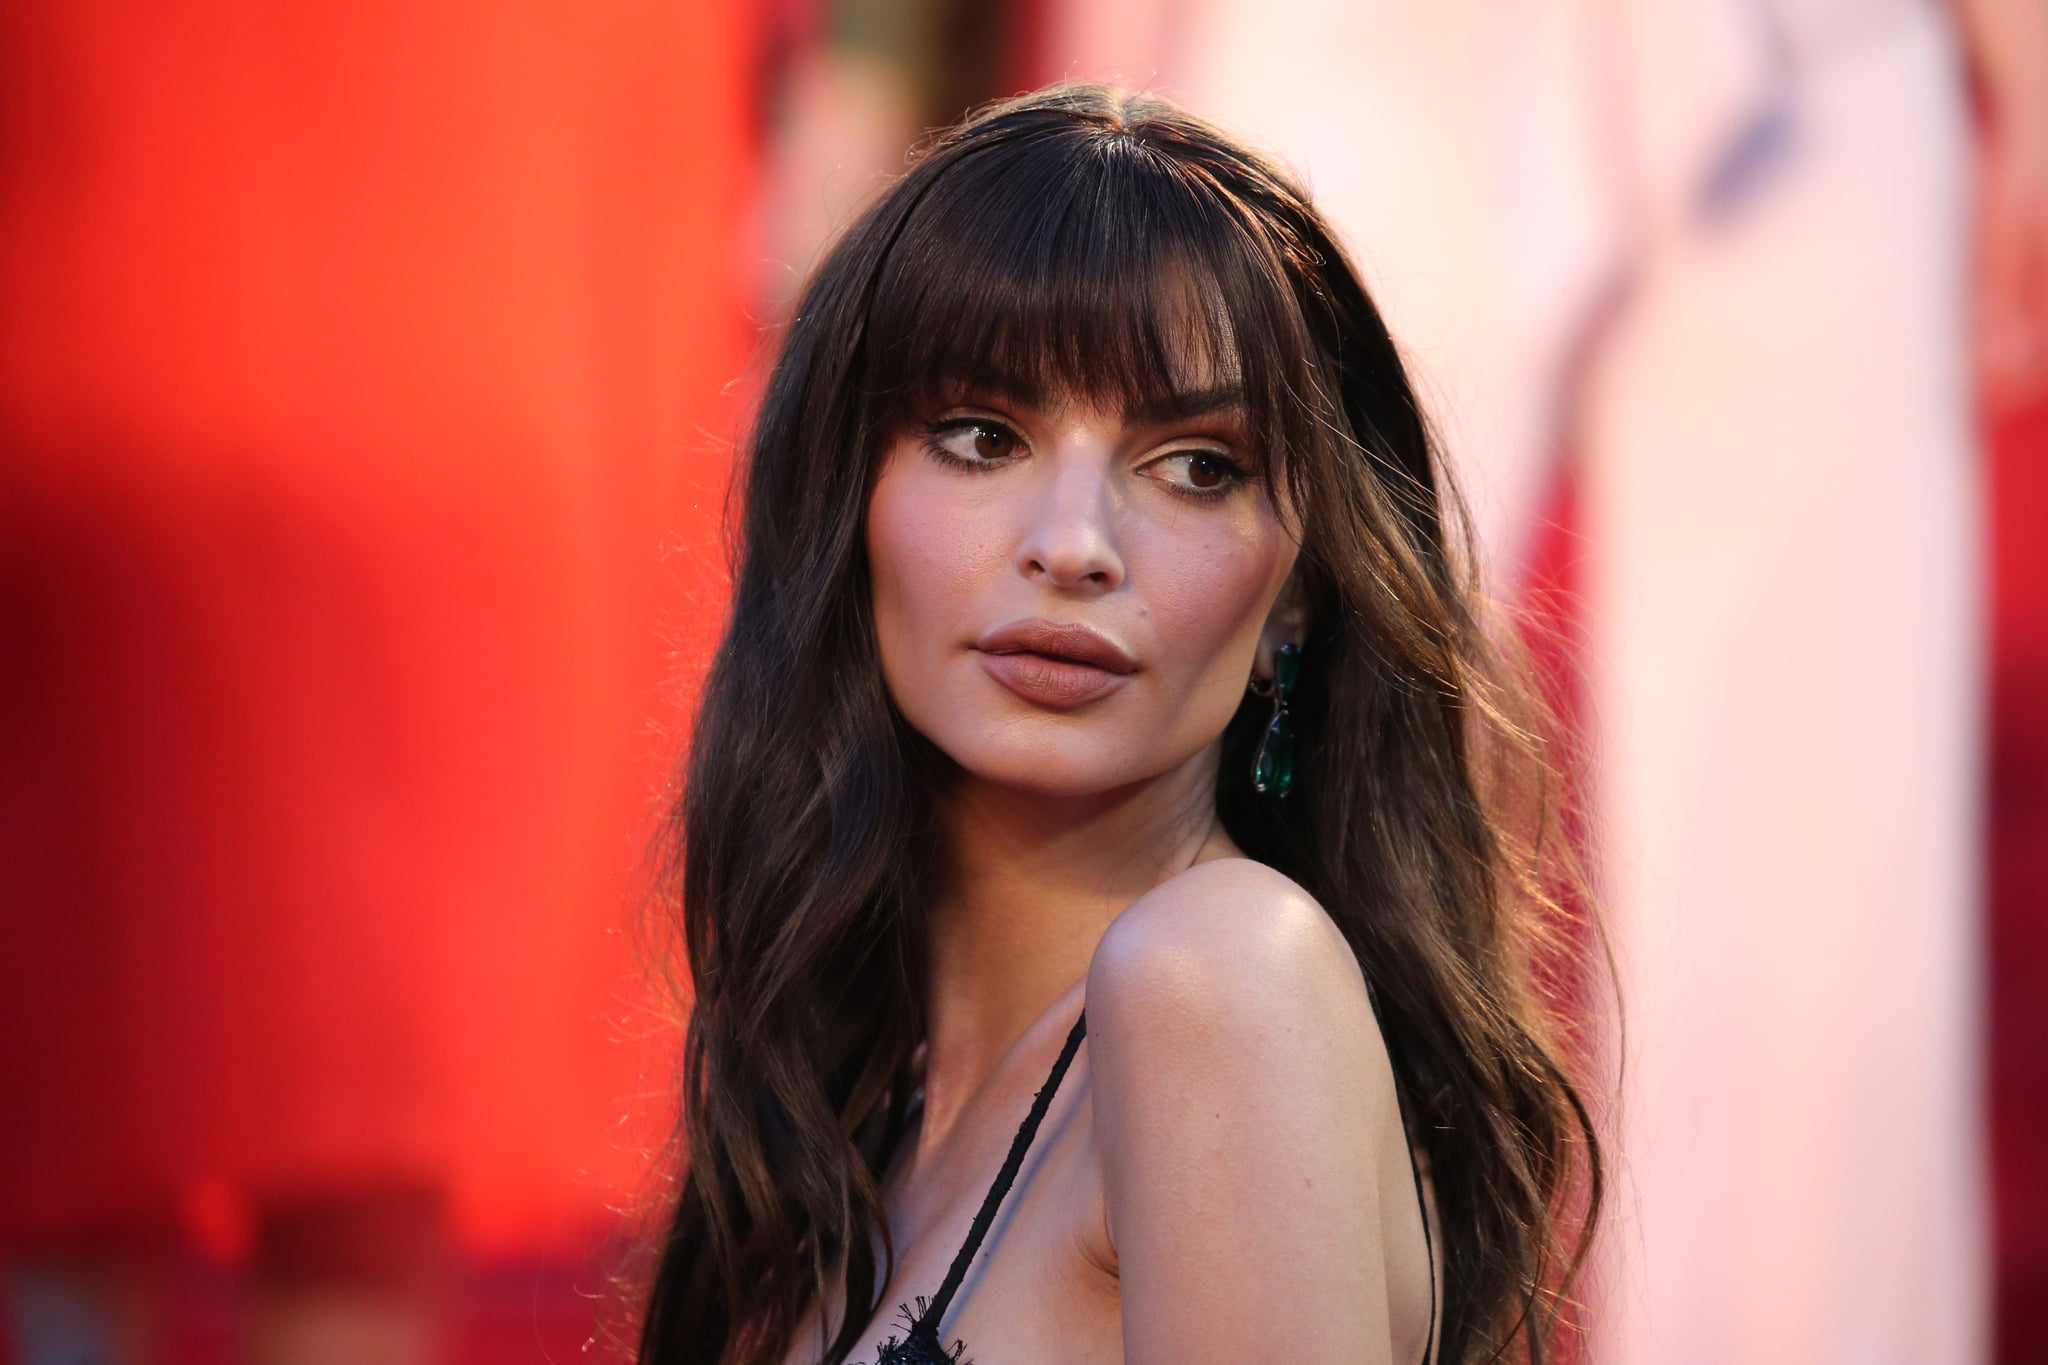 CANNES, FRANCE - MAY 23: Emily Ratajkowski attends the screening of 